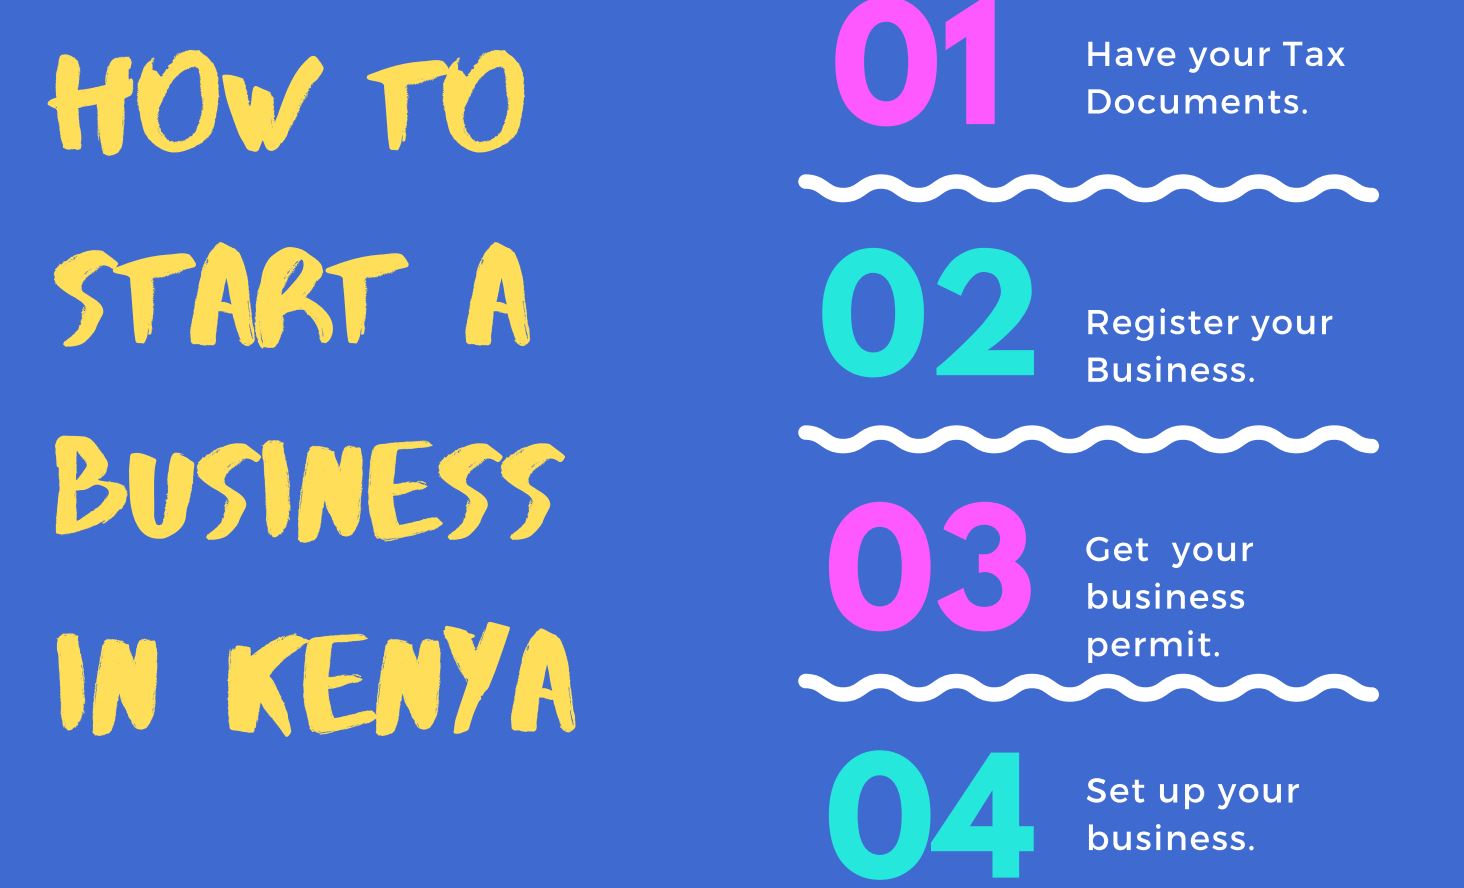 Legal Requirements for Starting a Business in Kenya: Licenses needed